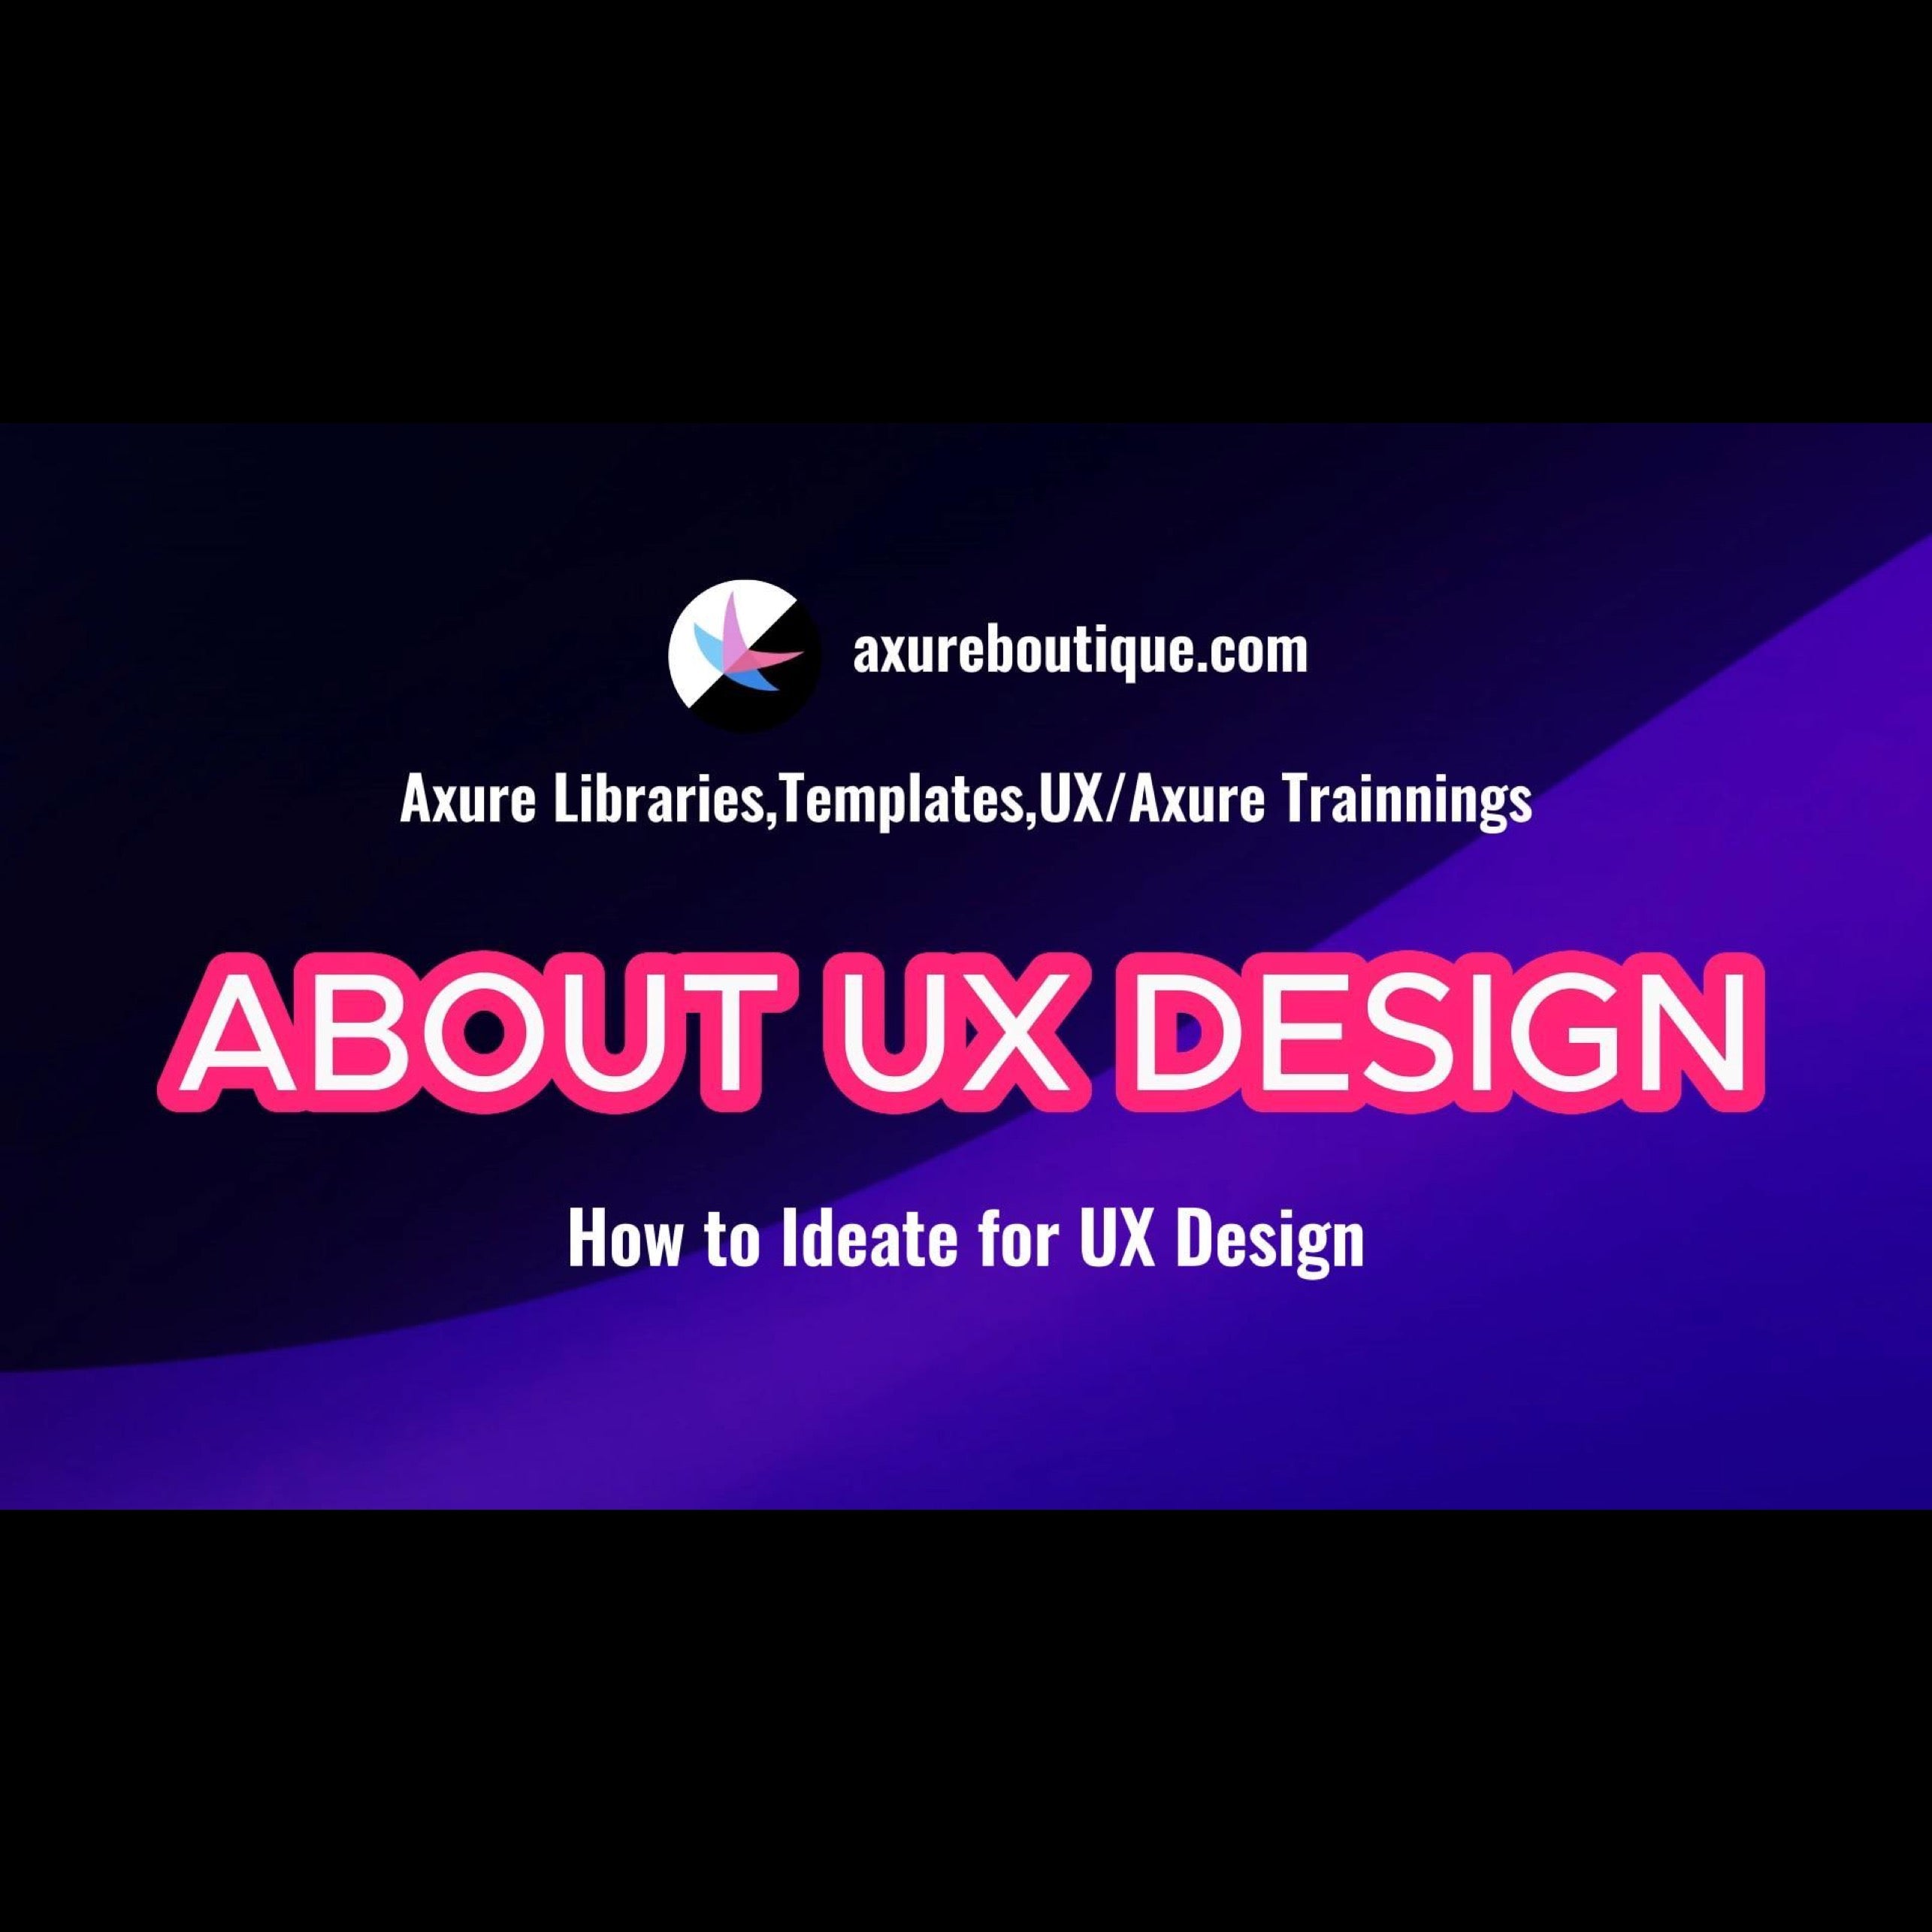 About UX: How to Ideate for UX Design? – AxureBoutique